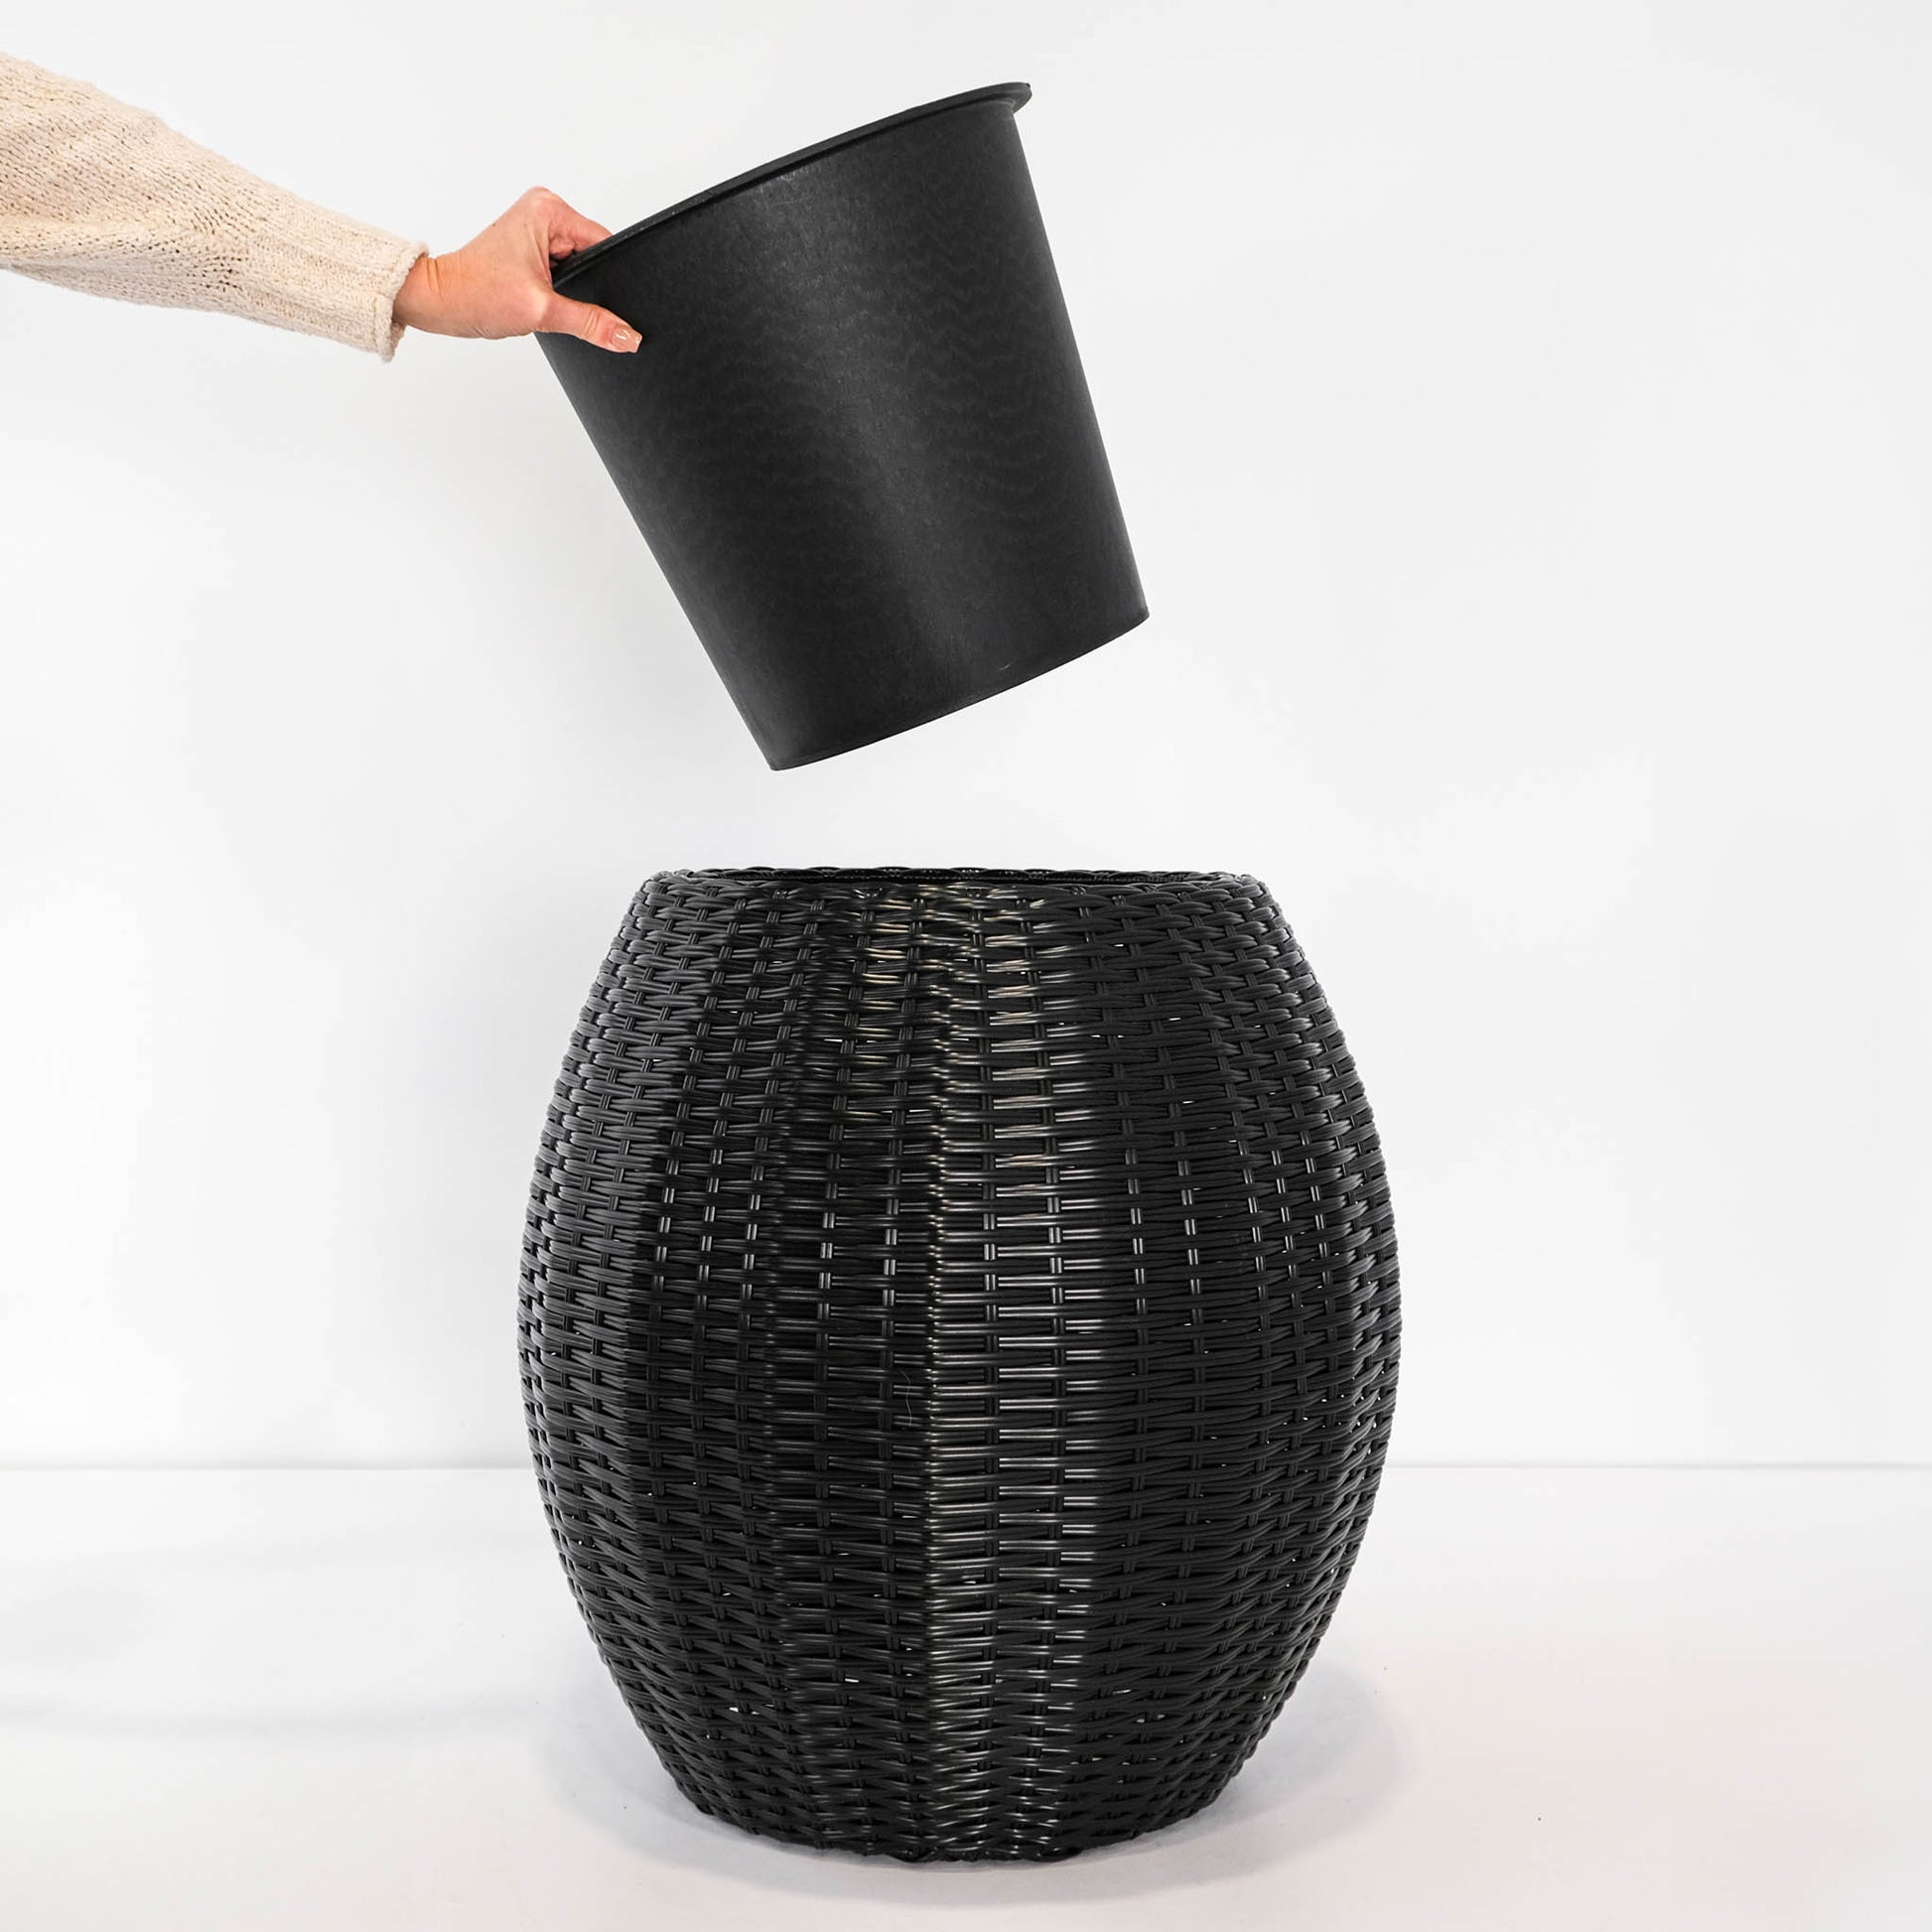 lack rattan planter with pot for elevated plant display.